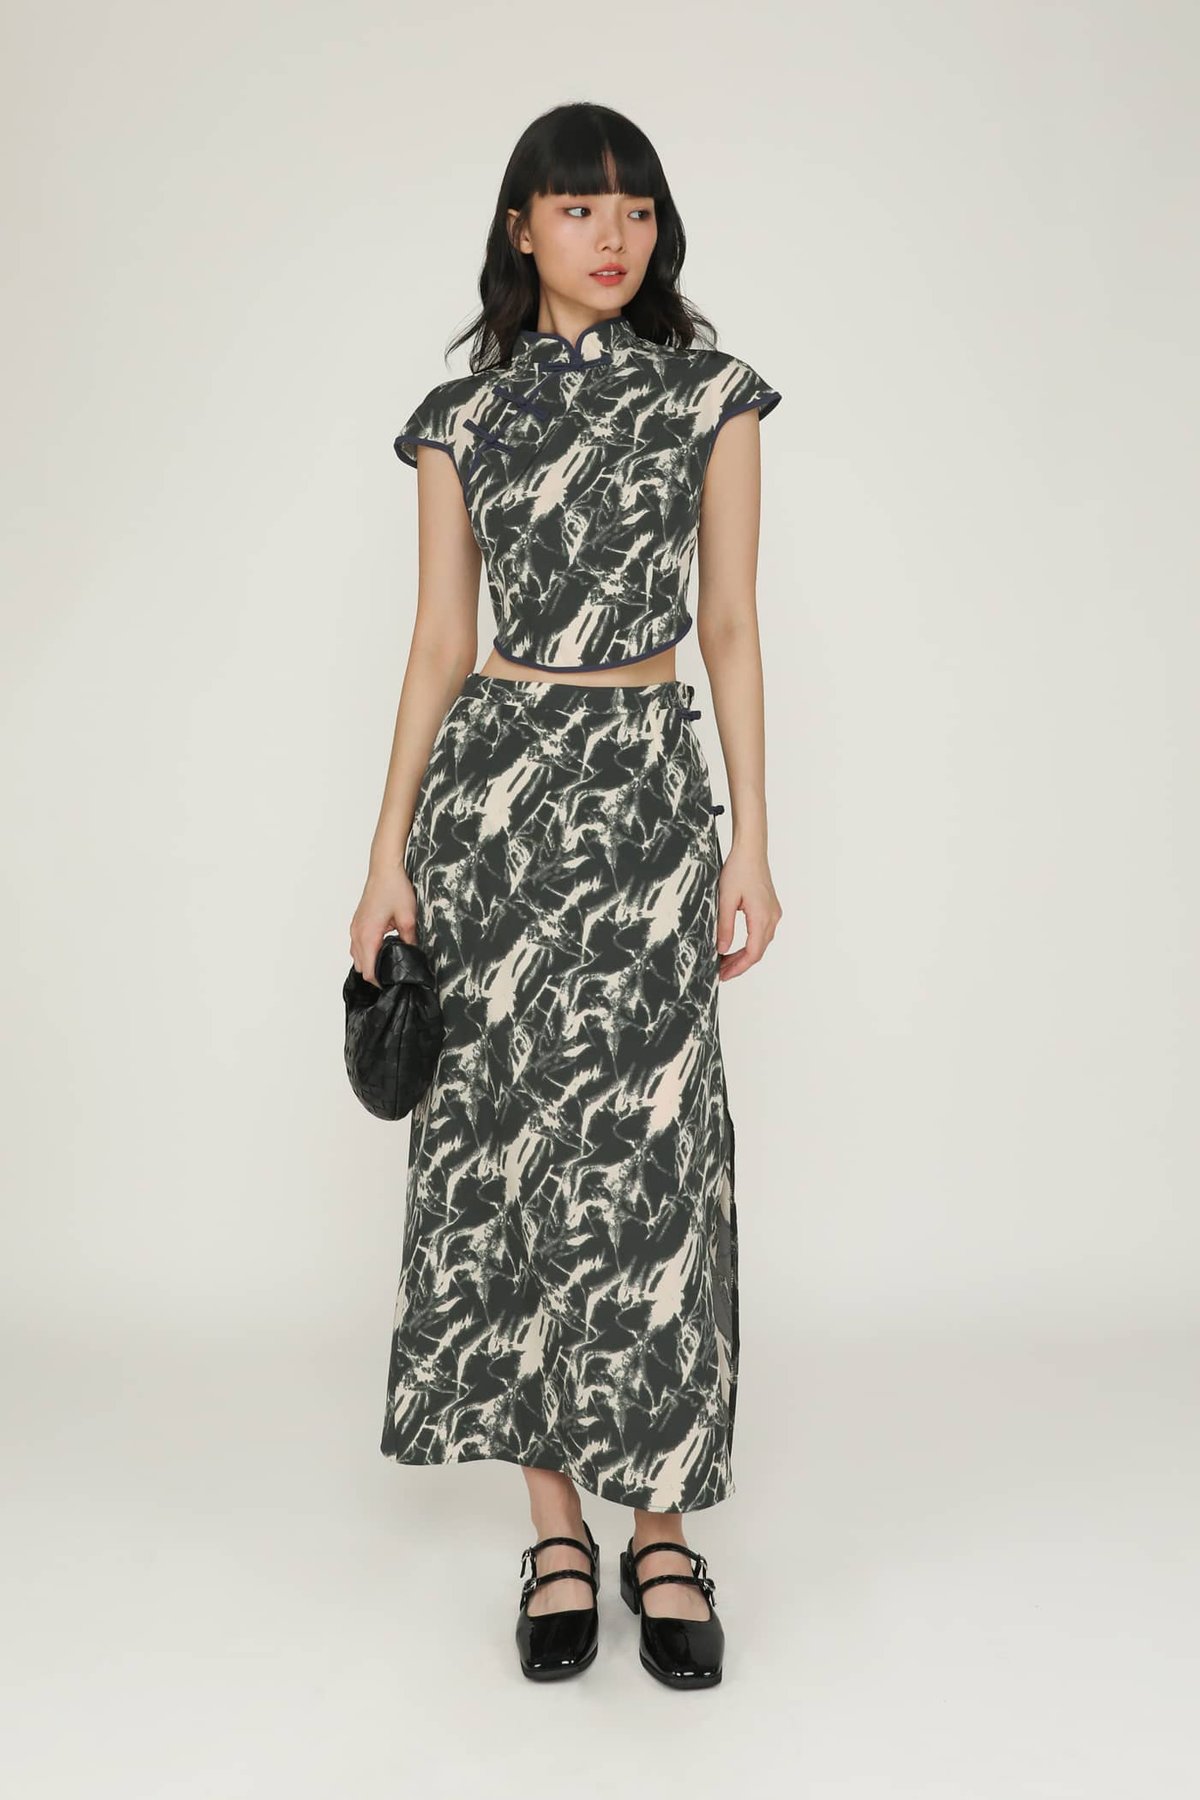 Ming Knotted Maxi Skirt (Printed)